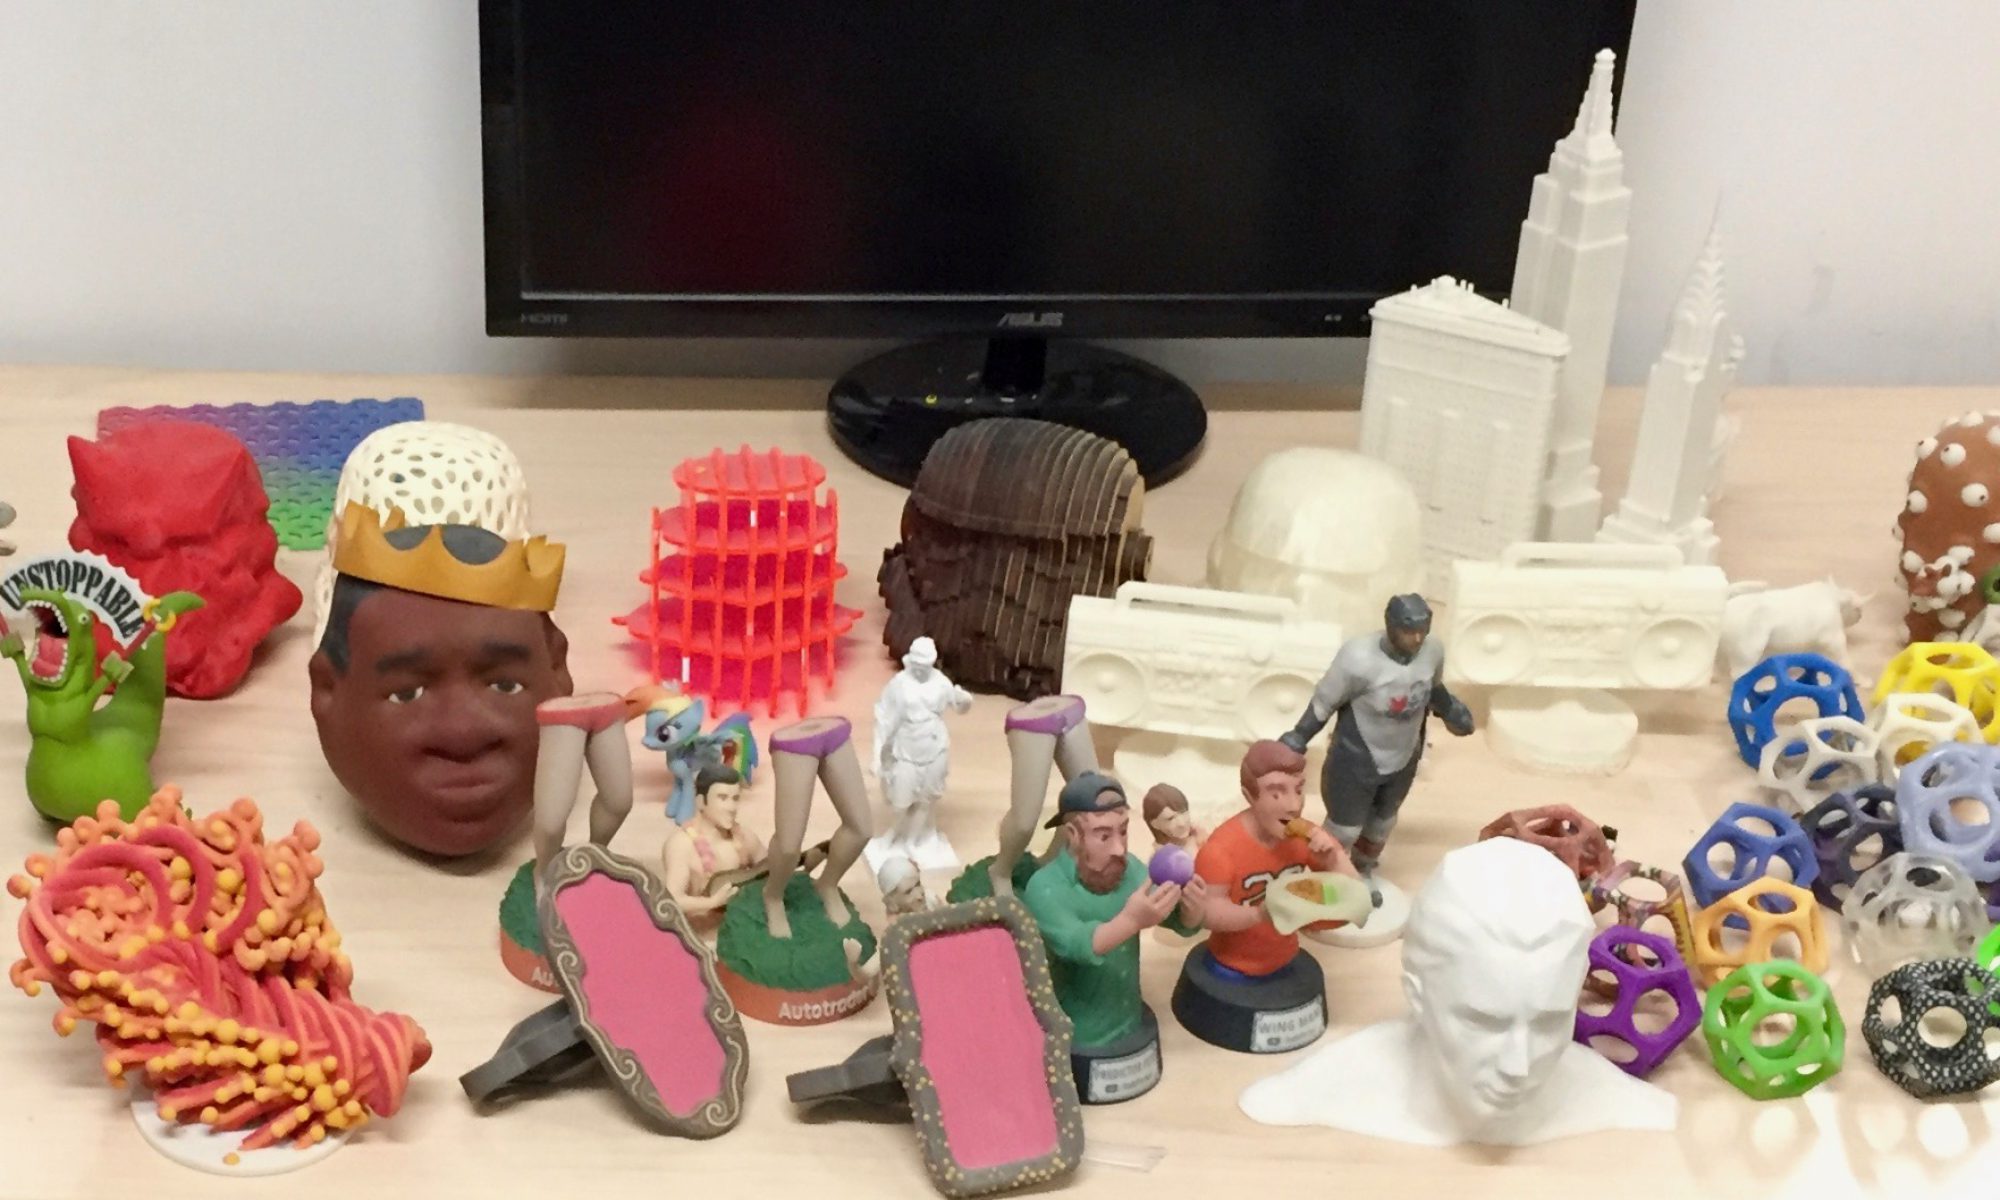 The 3D creations of Make Mode, based in the Brooklyn Fashion + Design Accelerator.